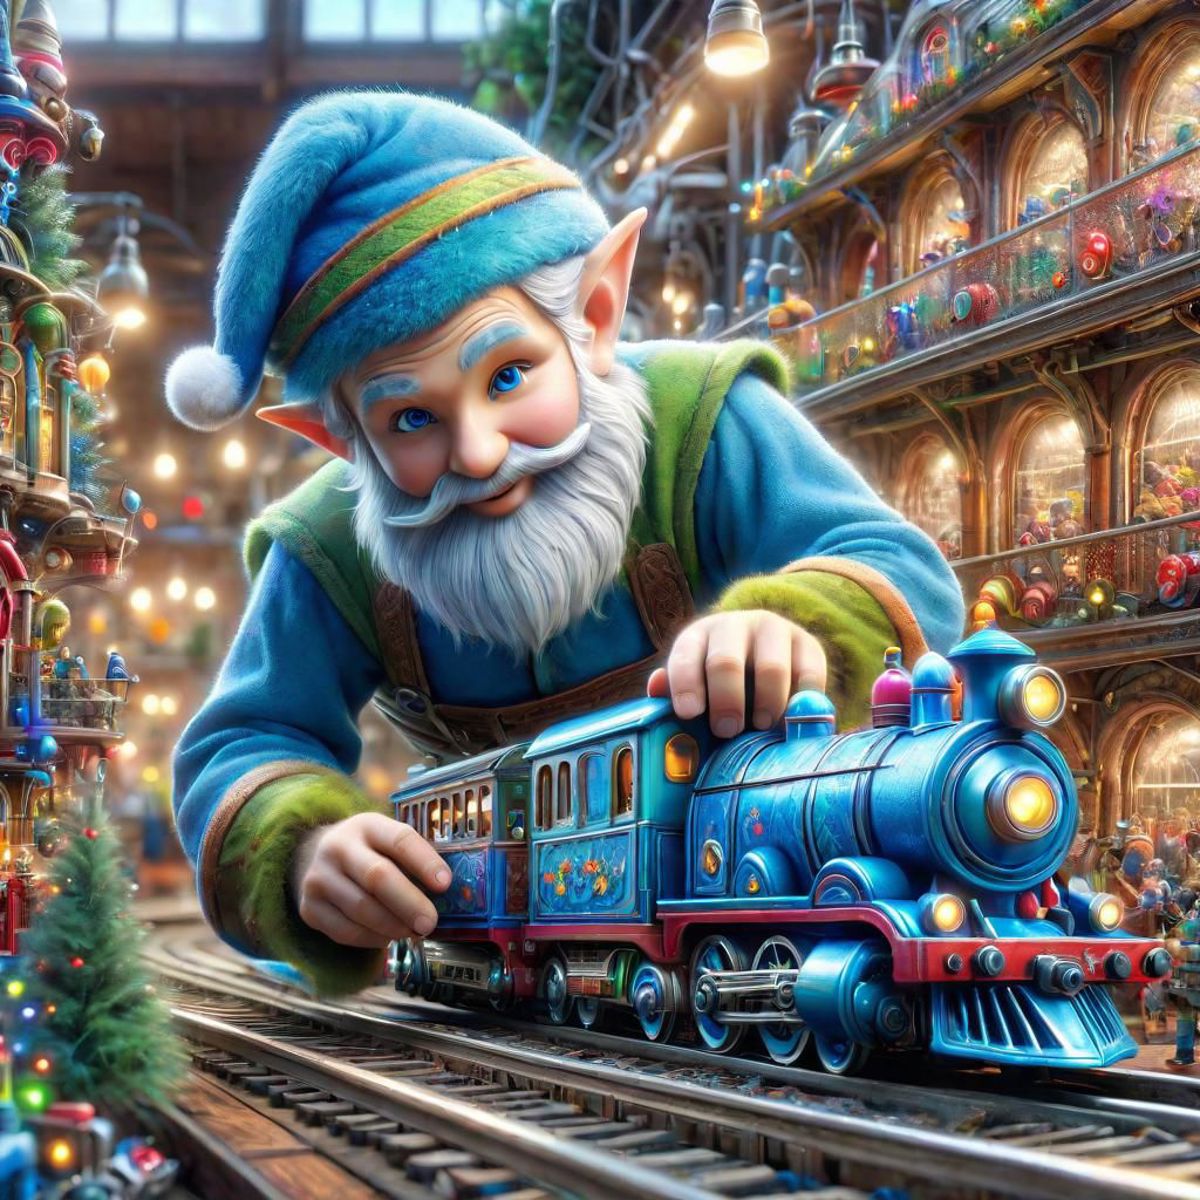 A blue elf in a Santa hat is pushing a blue train on a track.